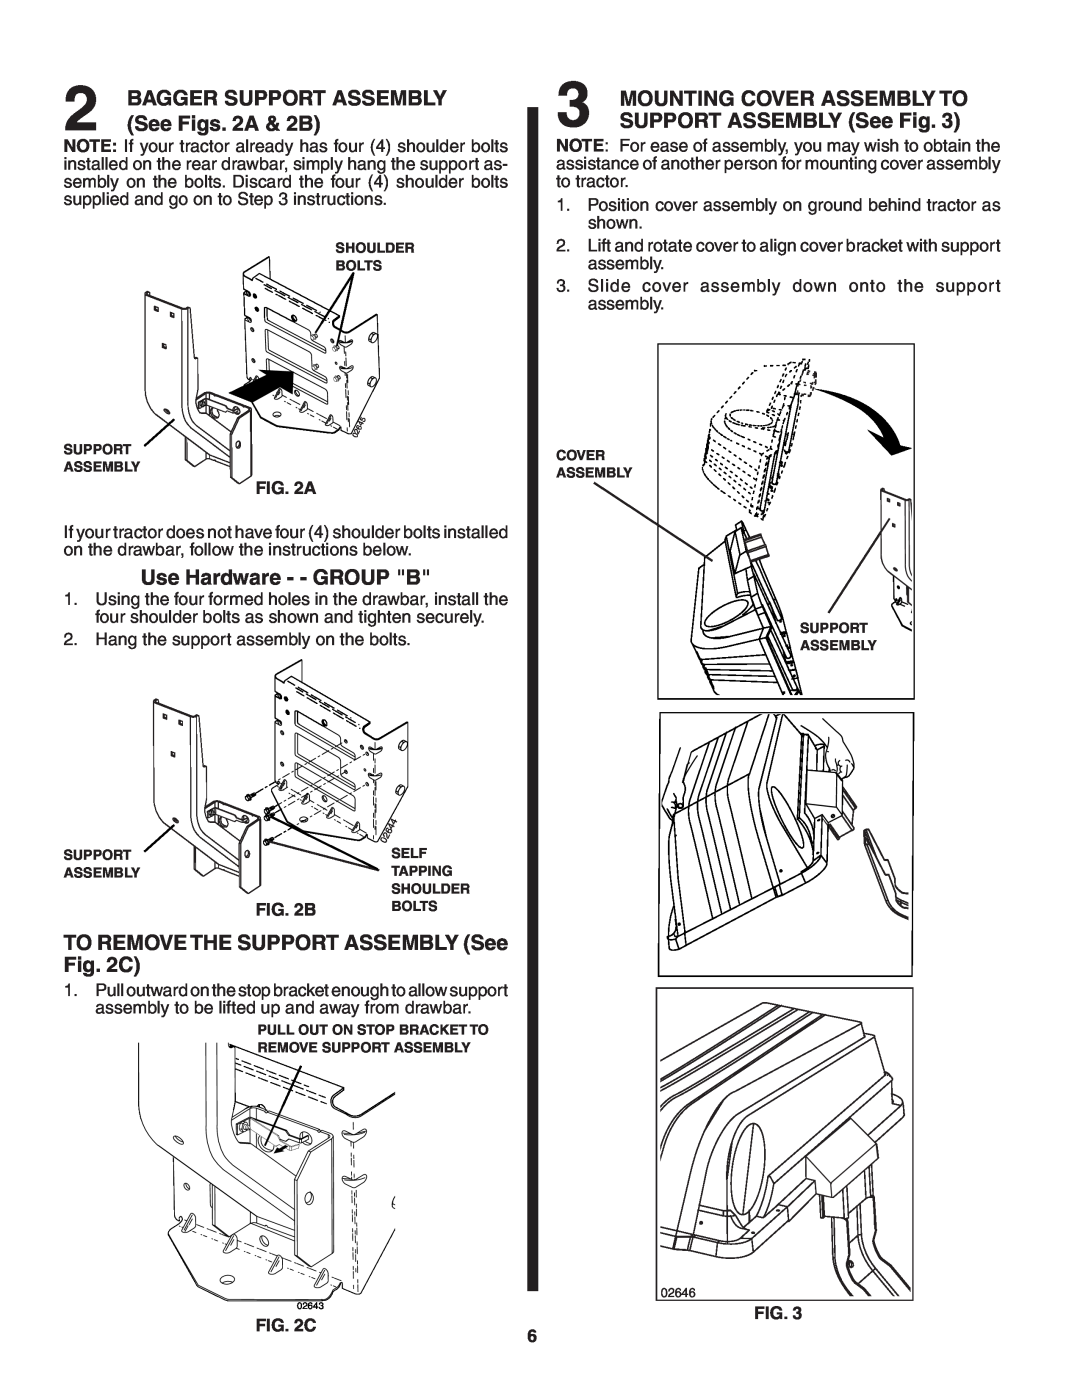 Poulan QC38B See Figs. 2A & 2B, Use Hardware - - GROUP B, TO REMOVE THE SUPPORT ASSEMBLY See C, SUPPORT ASSEMBLY See Fig 